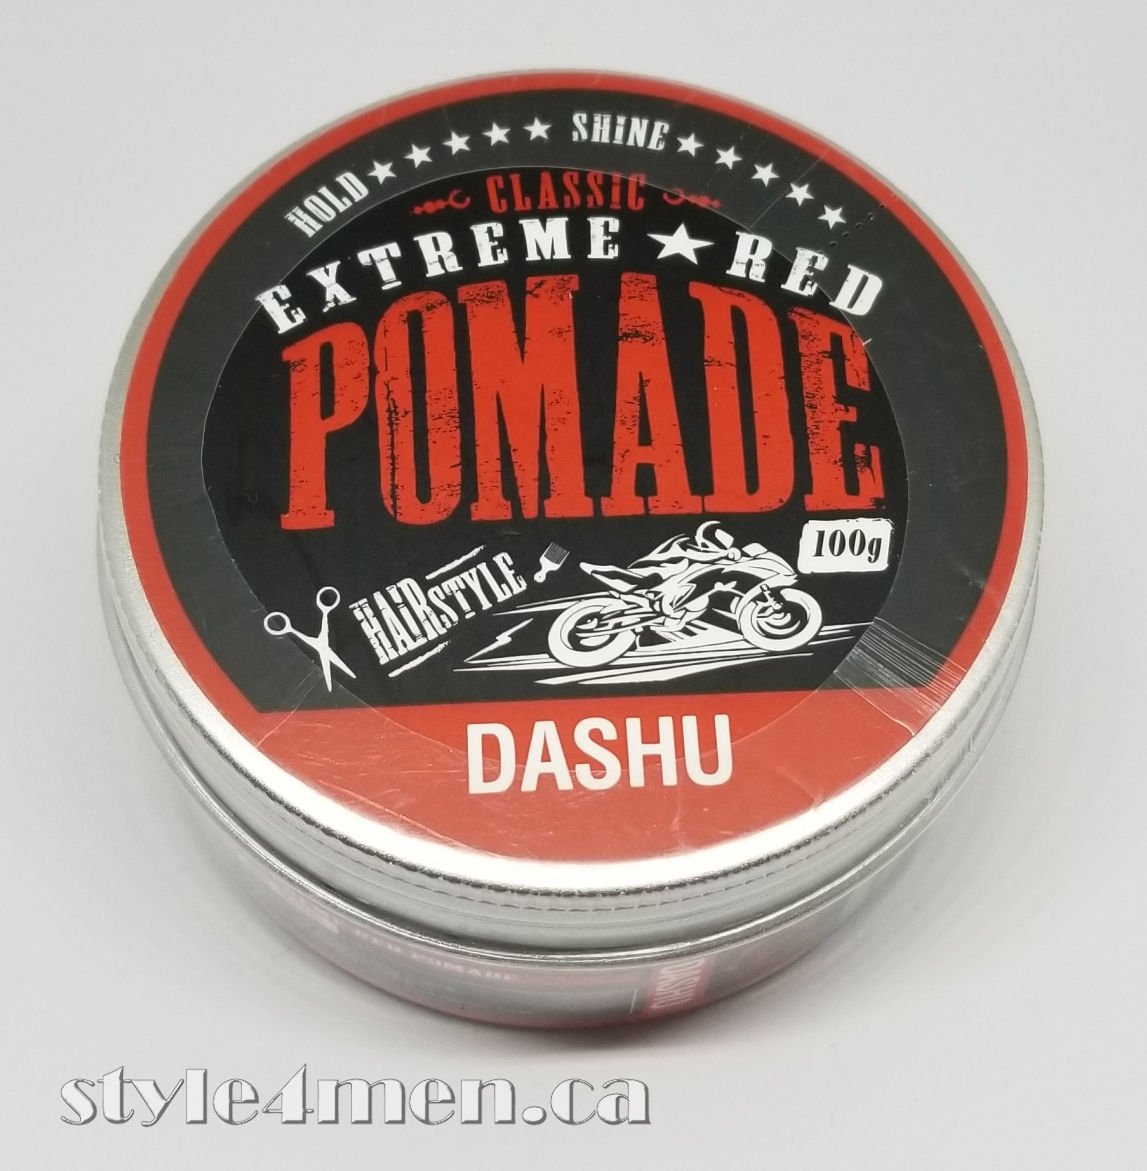 DASHU Extreme Red Pomade – A Total Find!